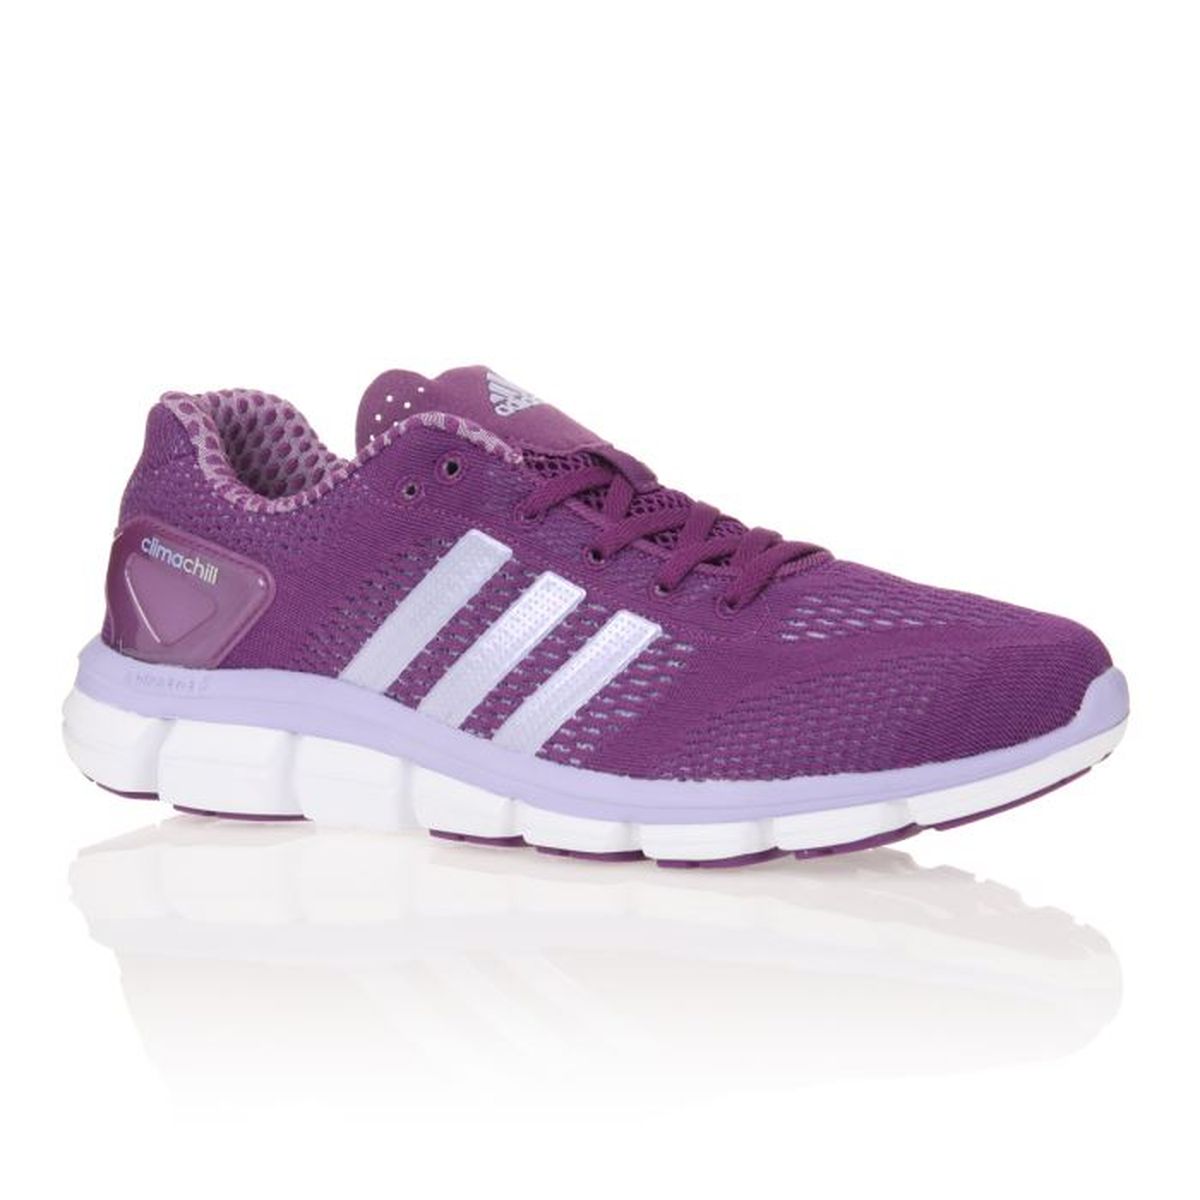 adidas chaussures running climacool fresh homme